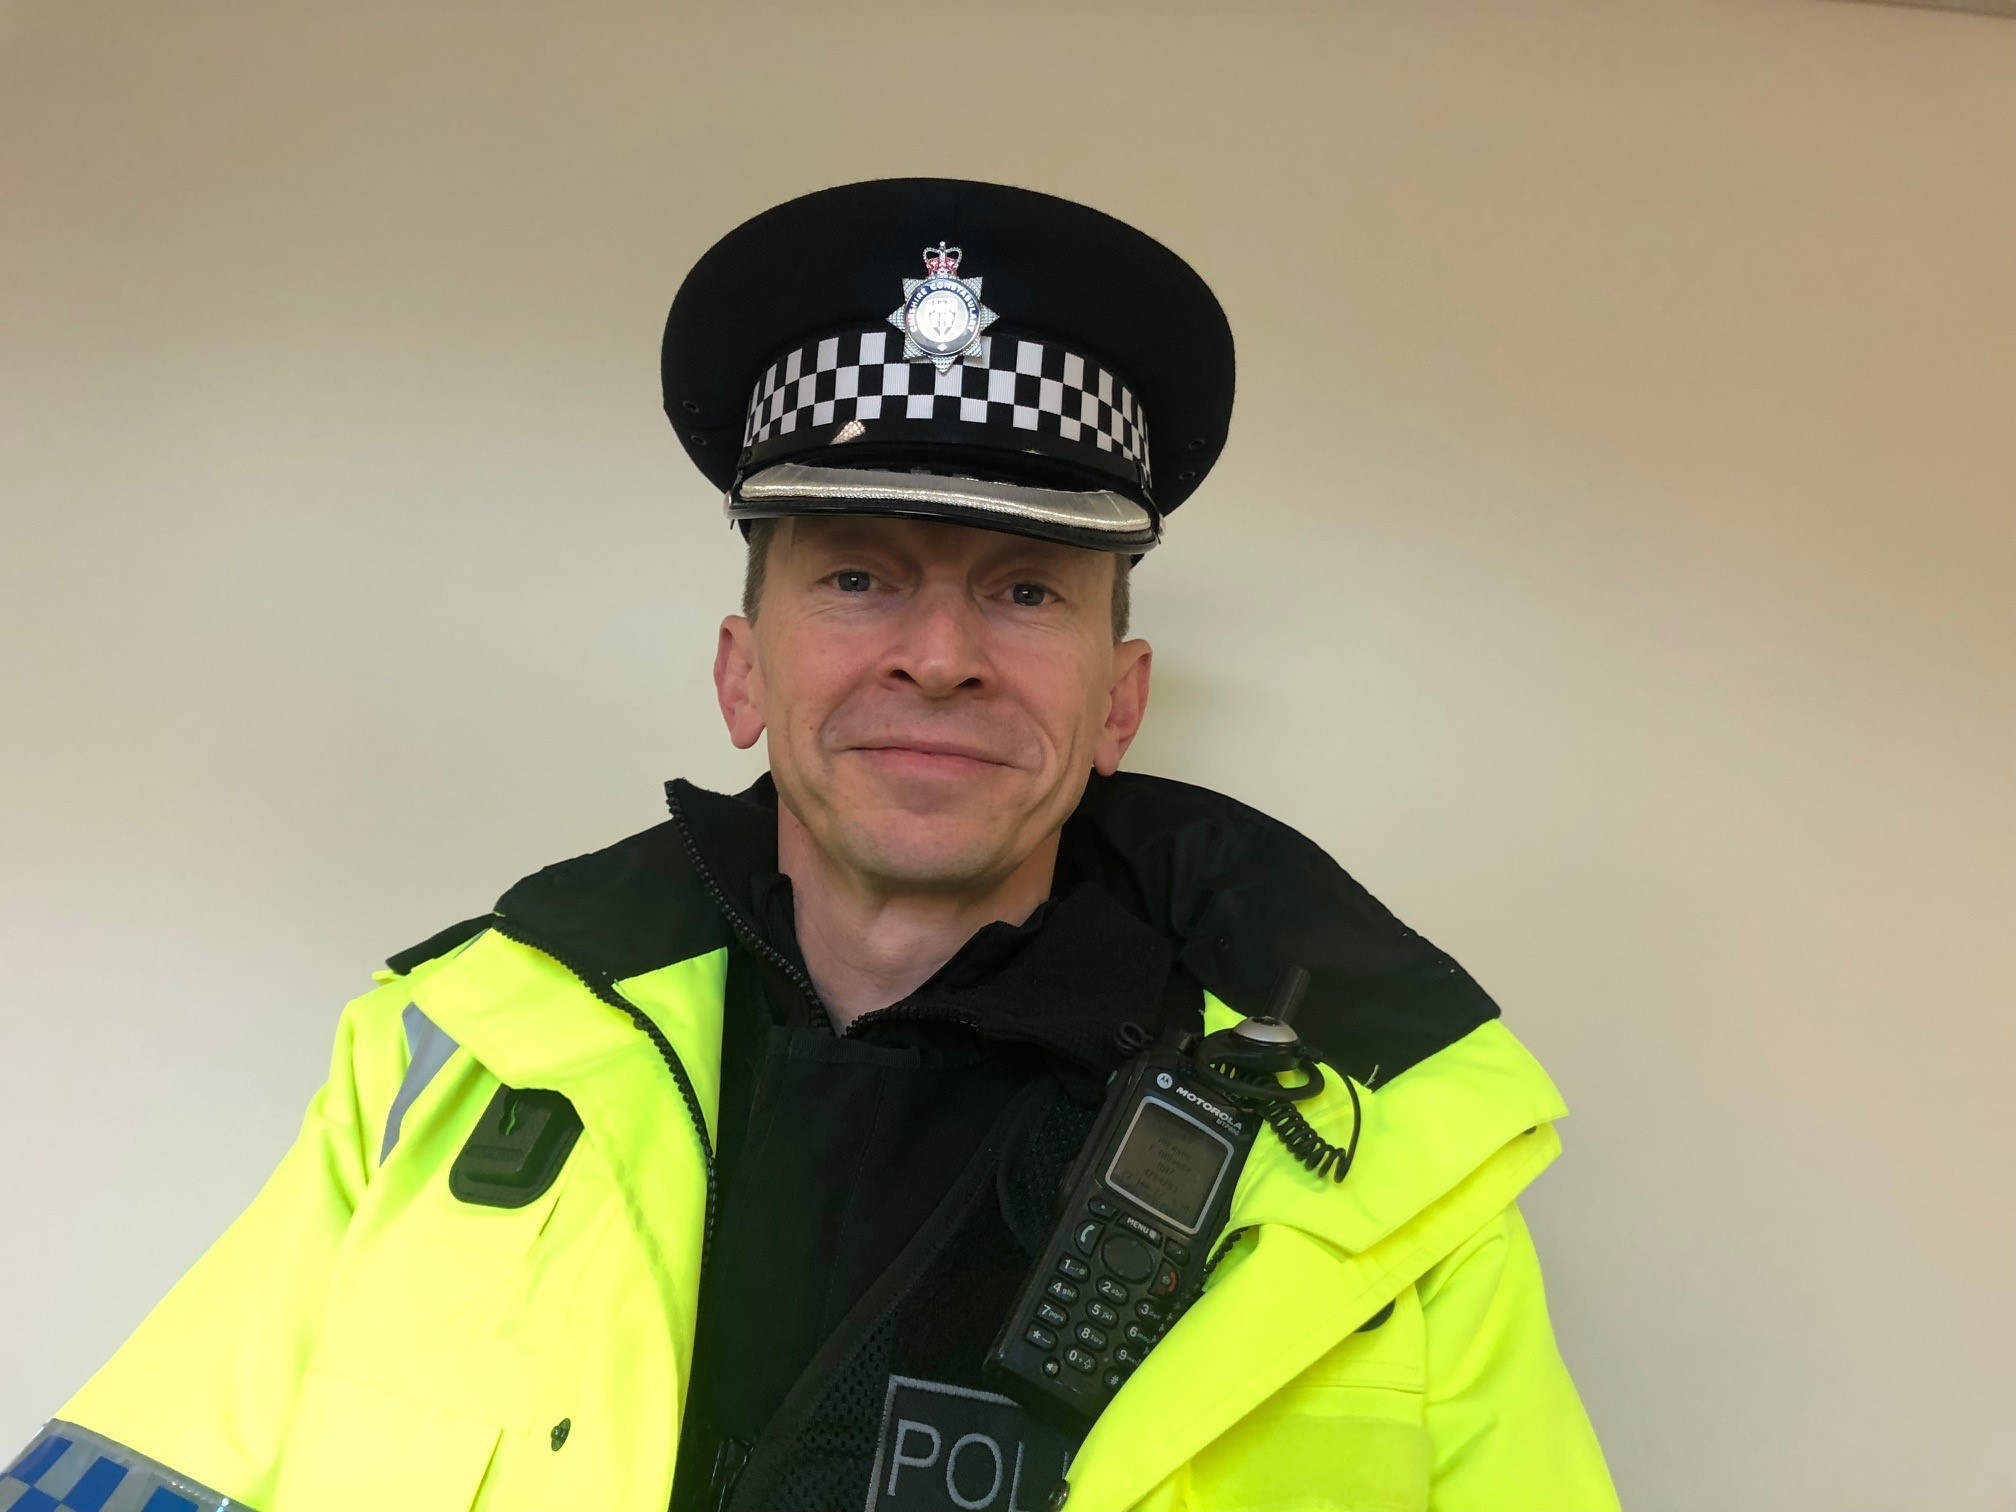 Superintendent Jon Betts, head of roads policing for Cheshire